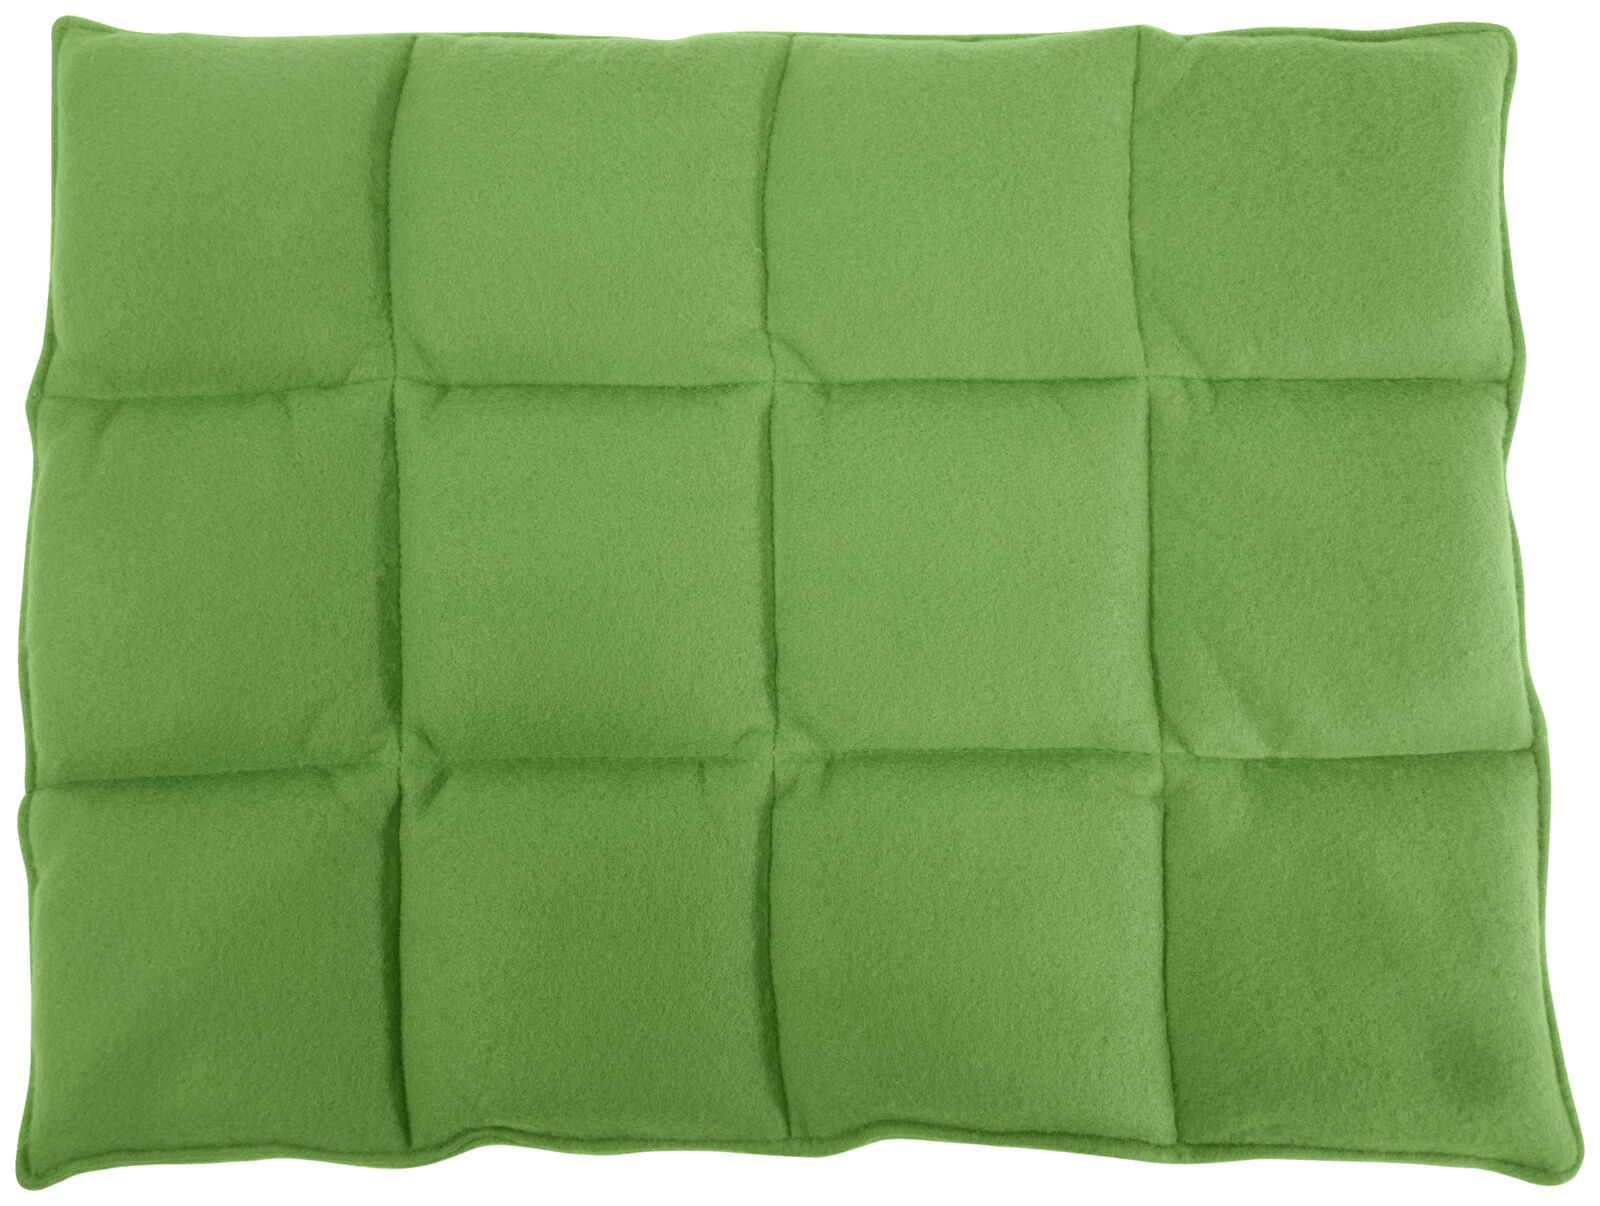 Abilitations Weighted Lap Pad, Large, Green